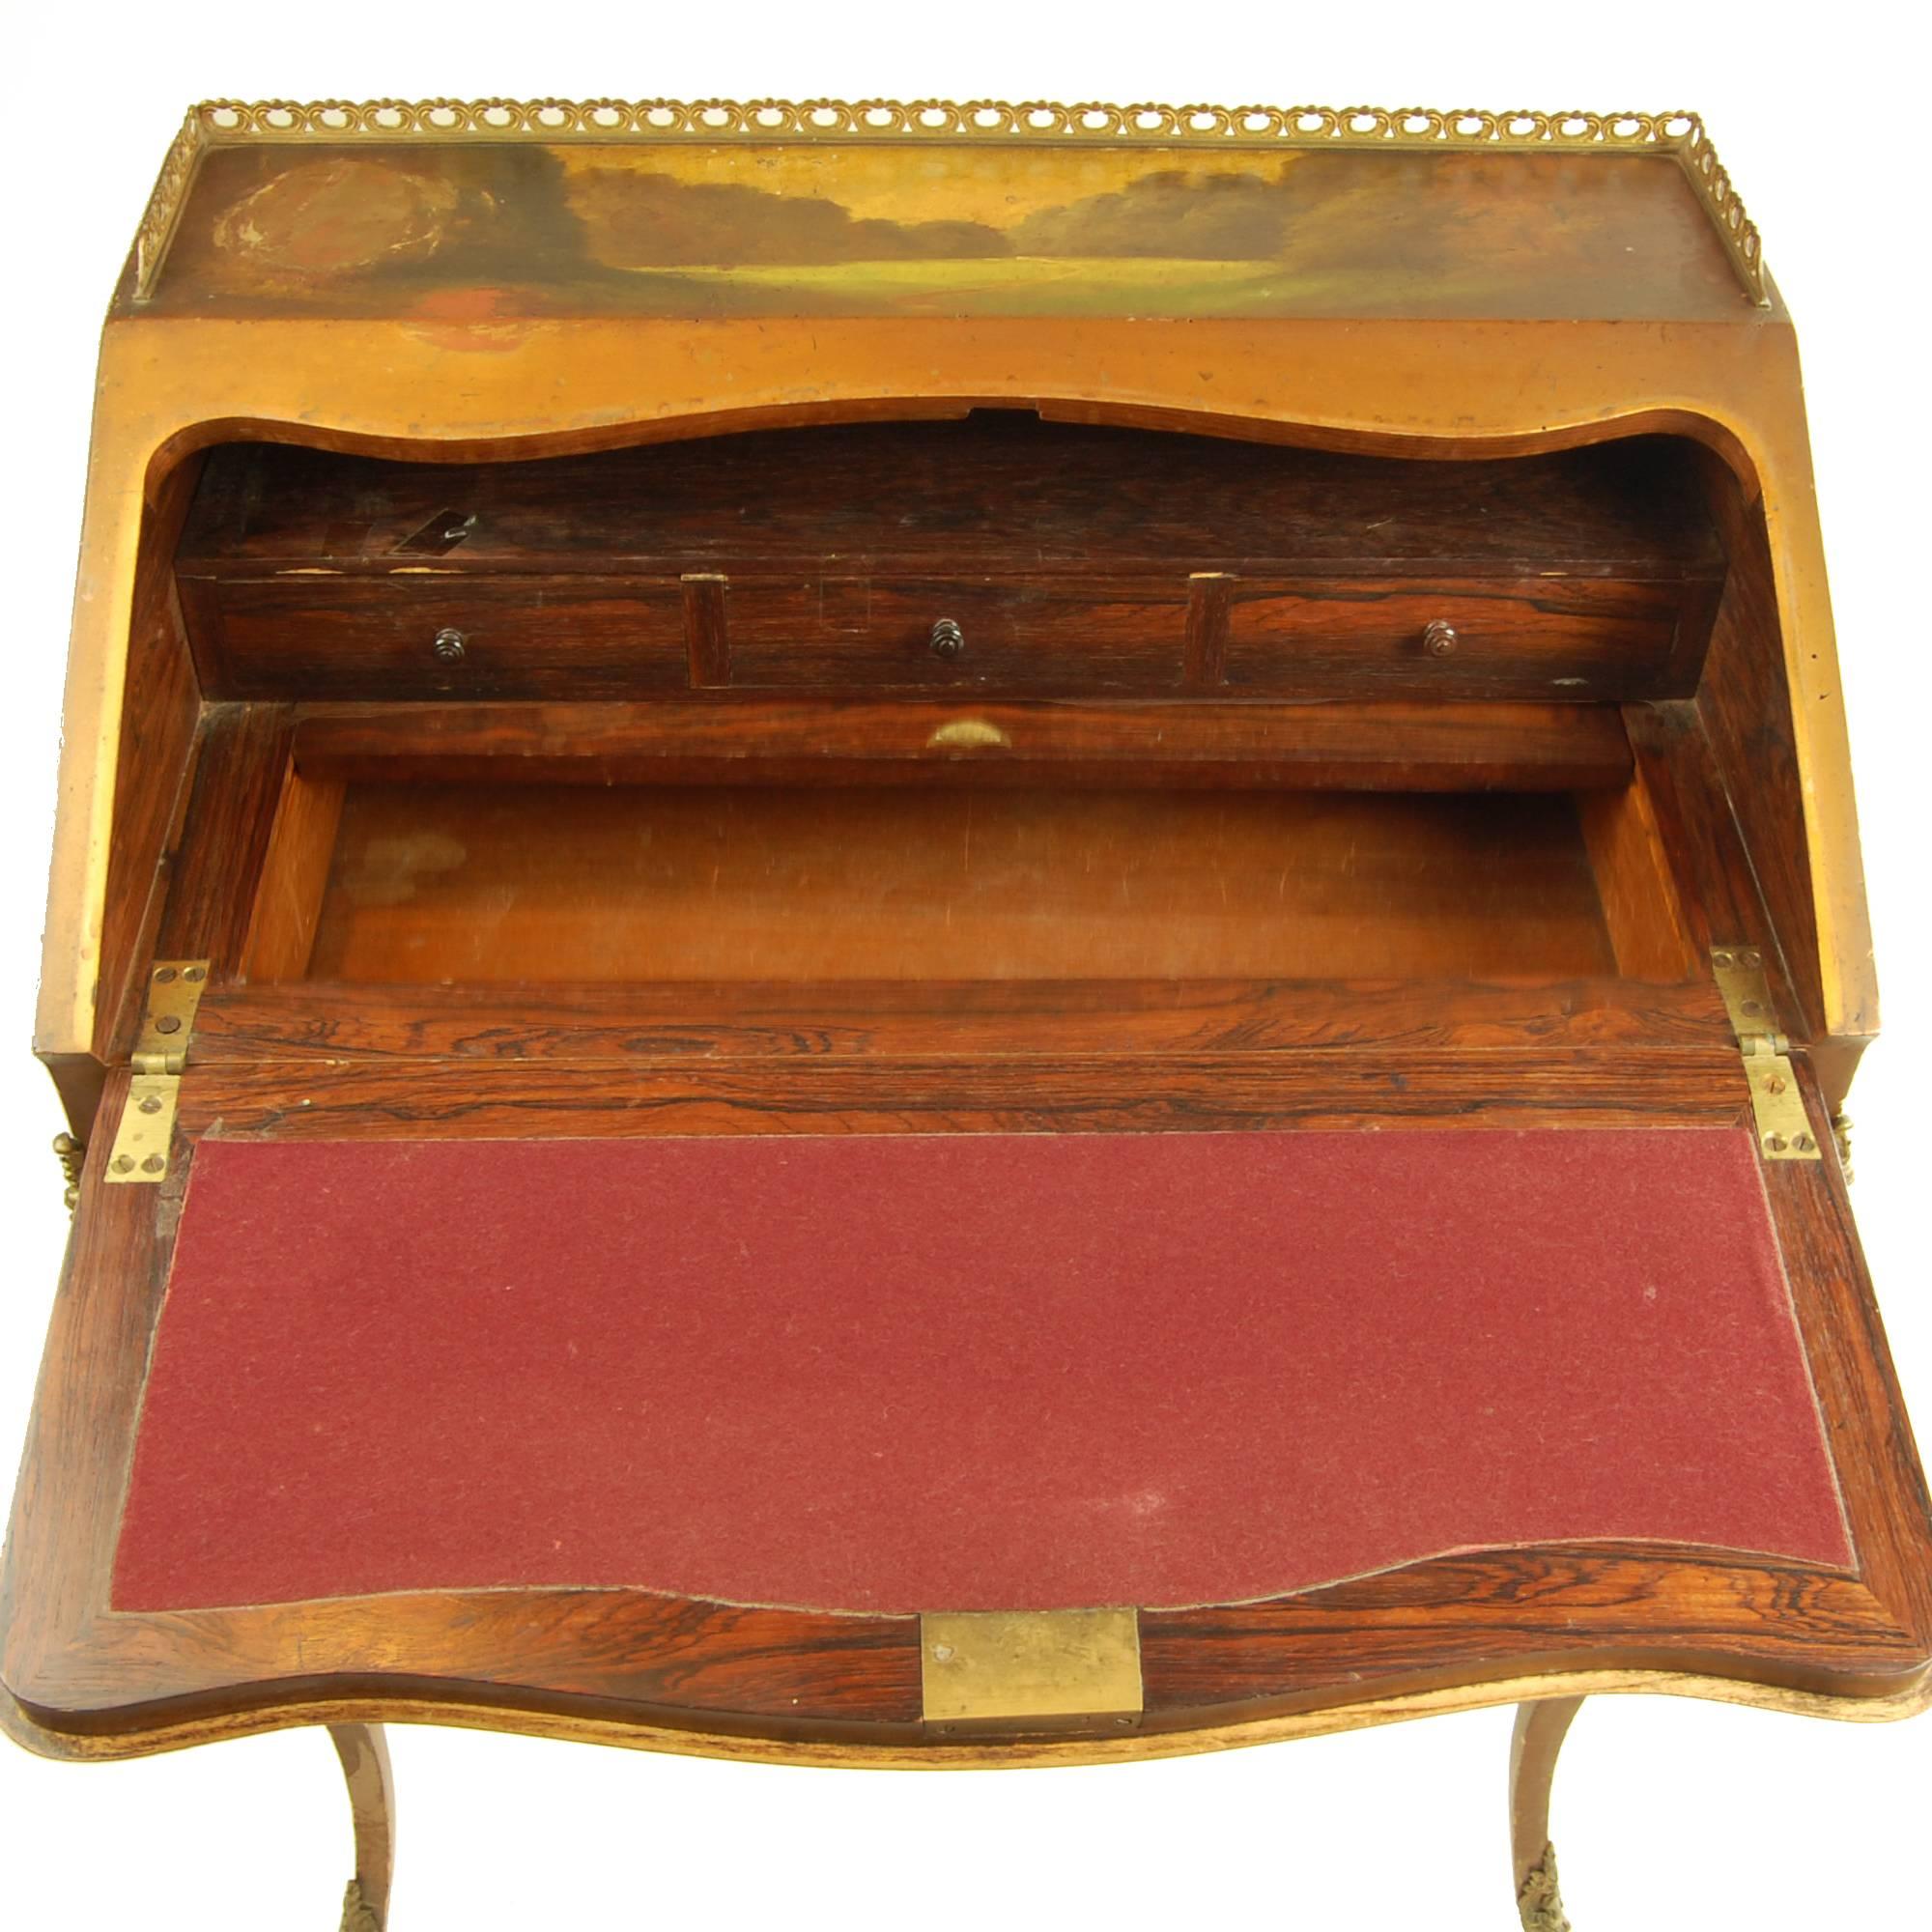 Hand-Painted Late 19th Century Antique Writing Desk with Painted Scene Fabric Lined For Sale